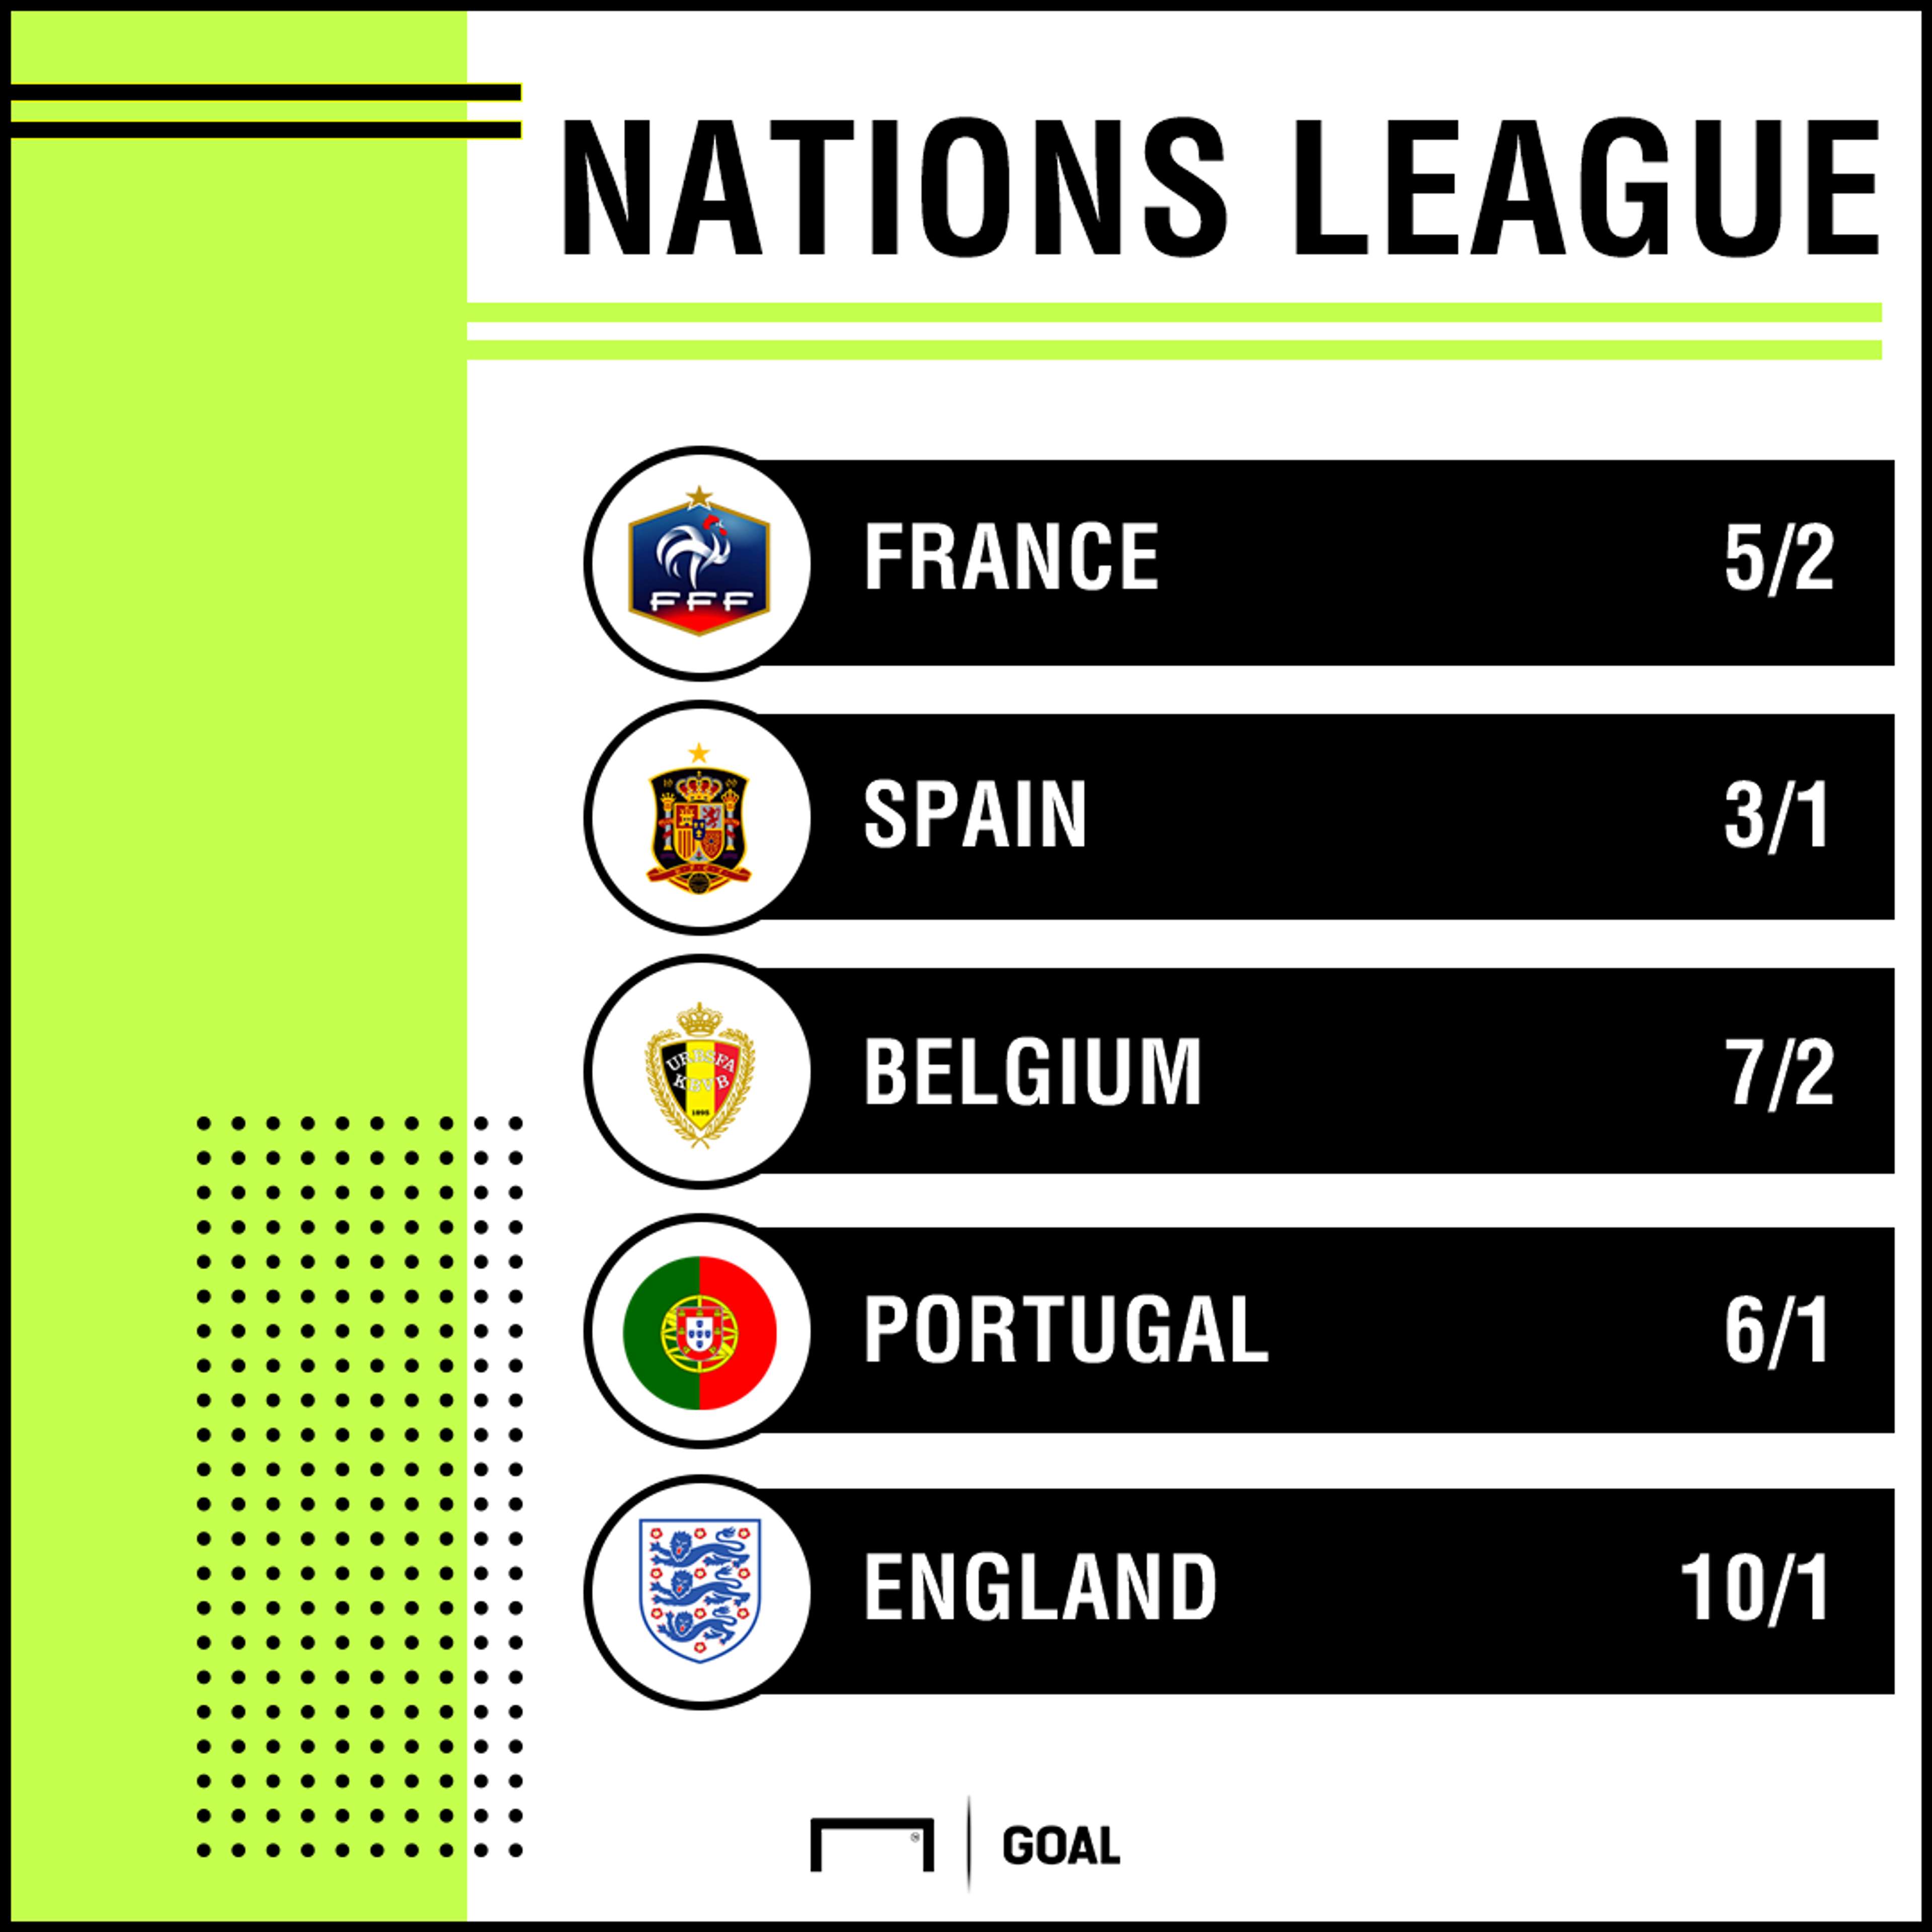 Nations League outright graphic